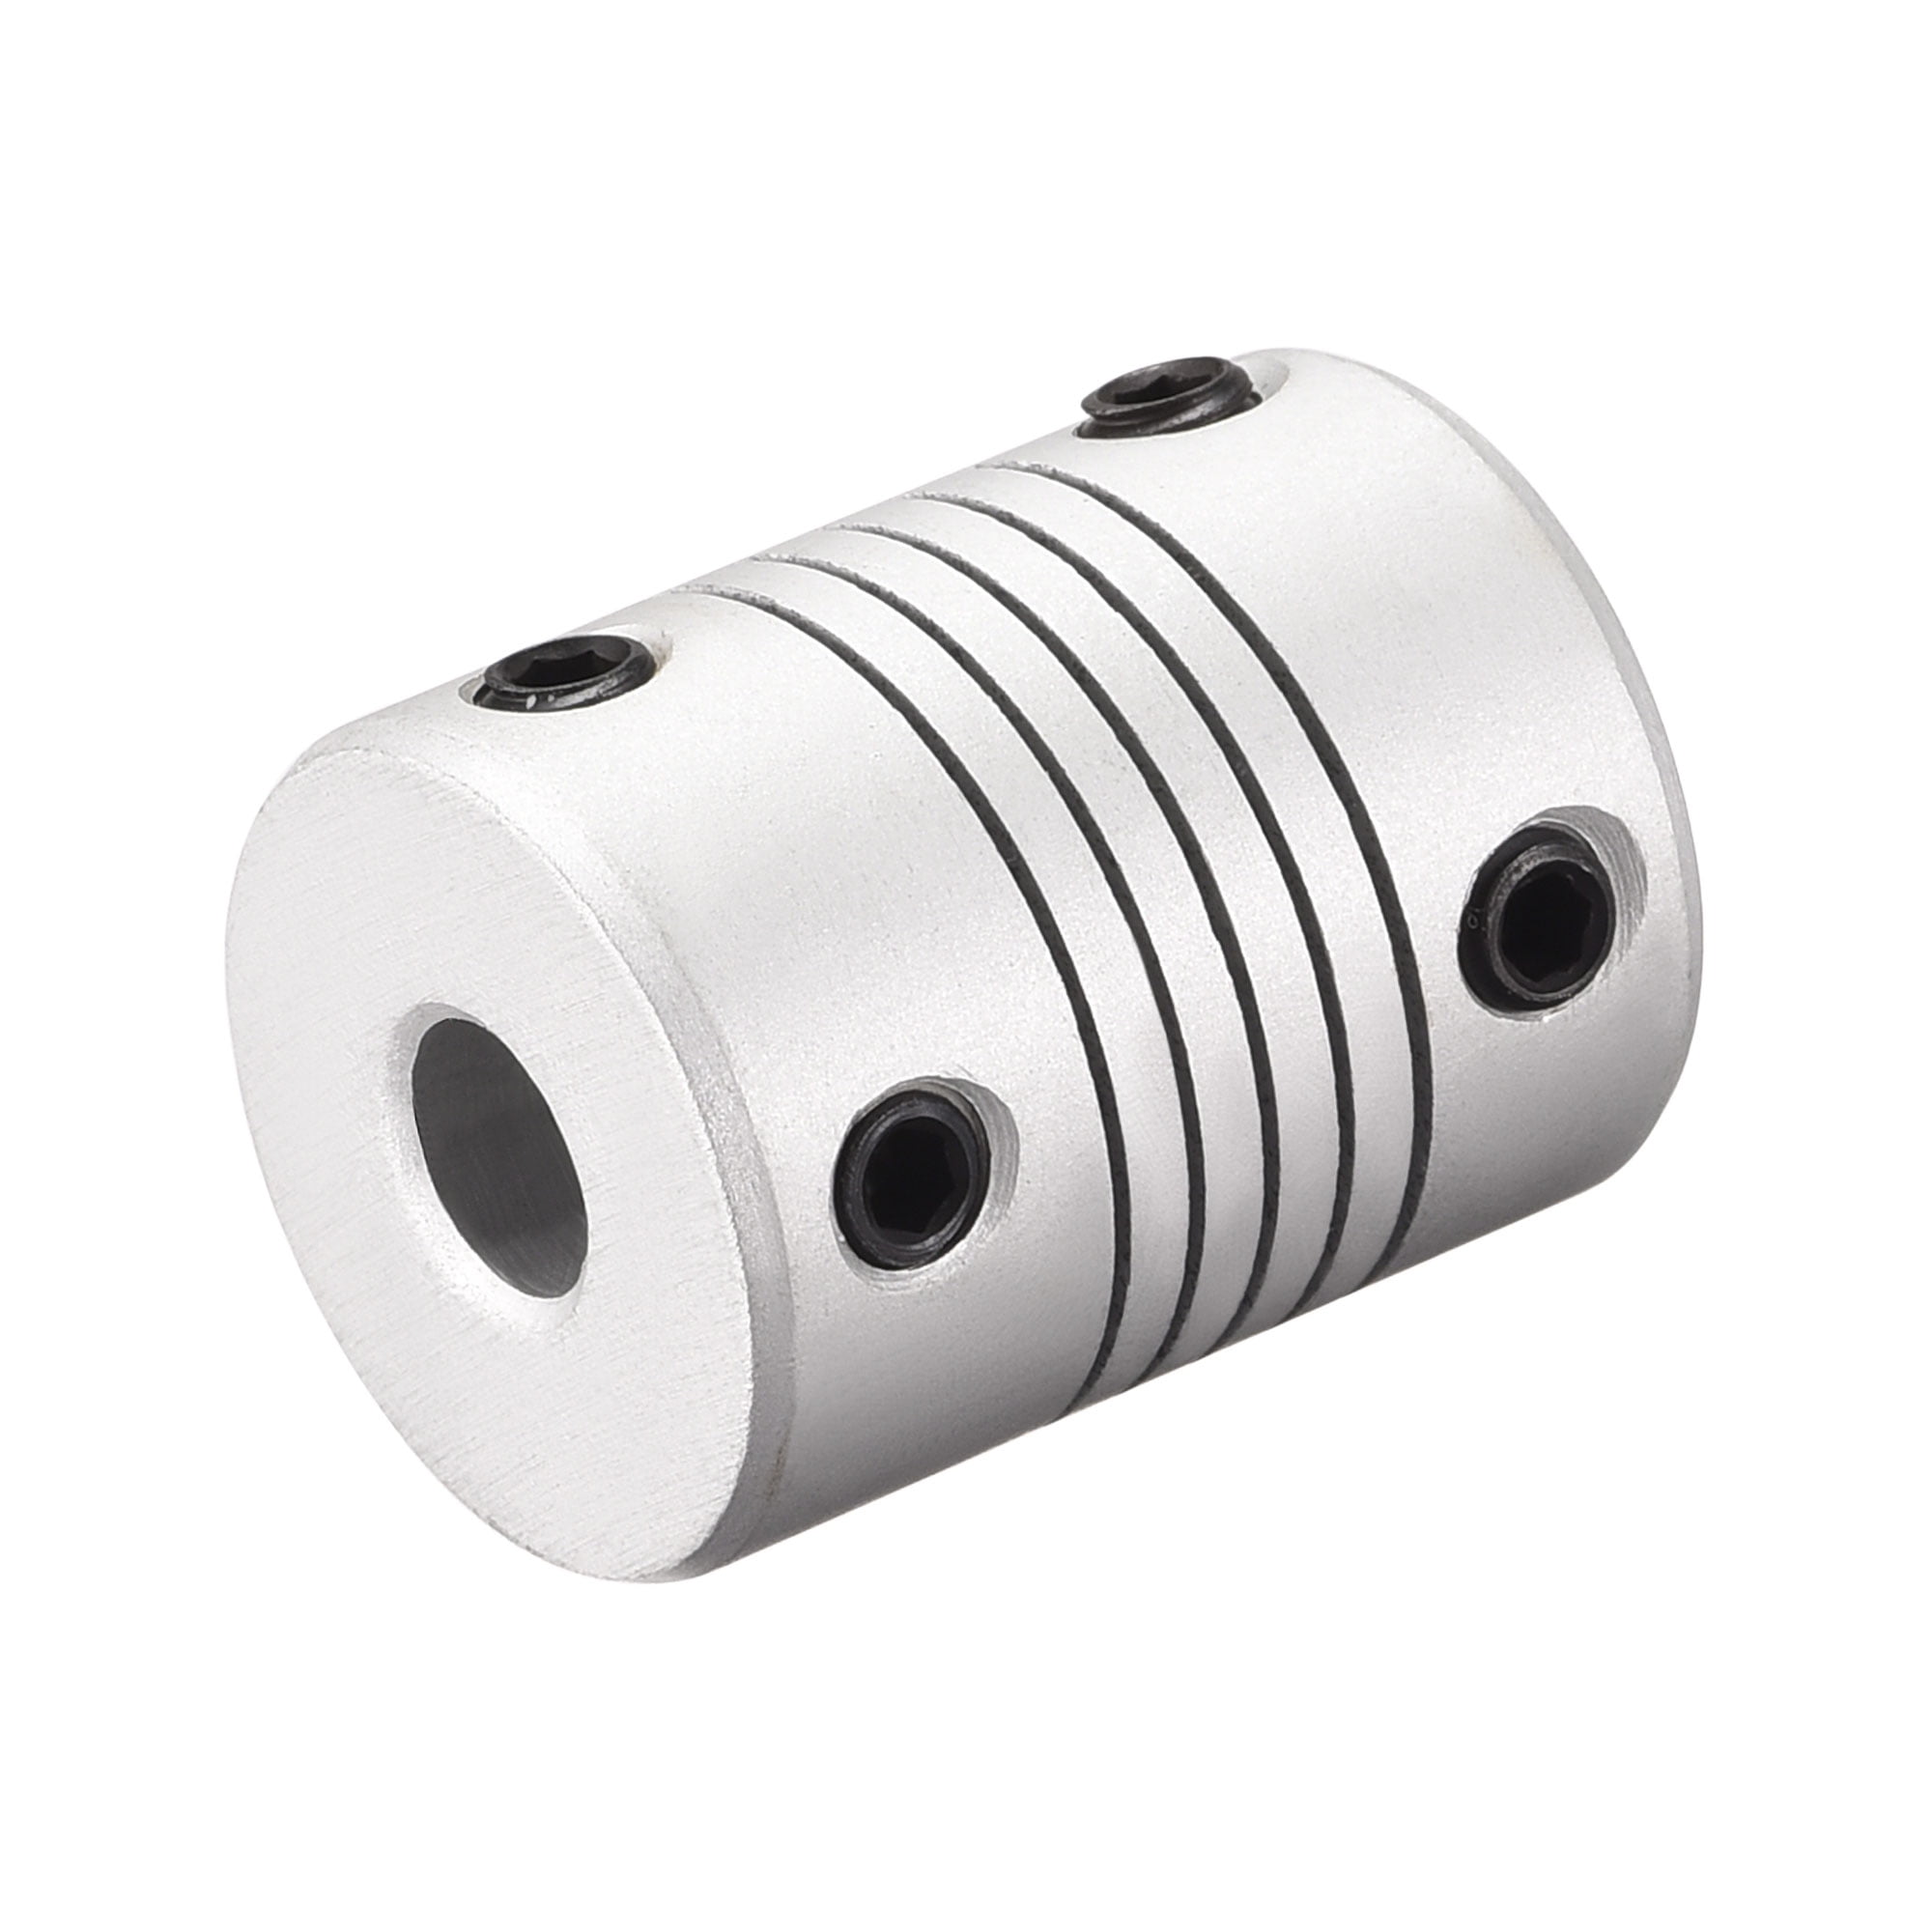 uxcell 9mm to 9mm Aluminum Alloy Shaft Coupling Flexible Coupler Motor Connector Joint L25xD19 Silver 